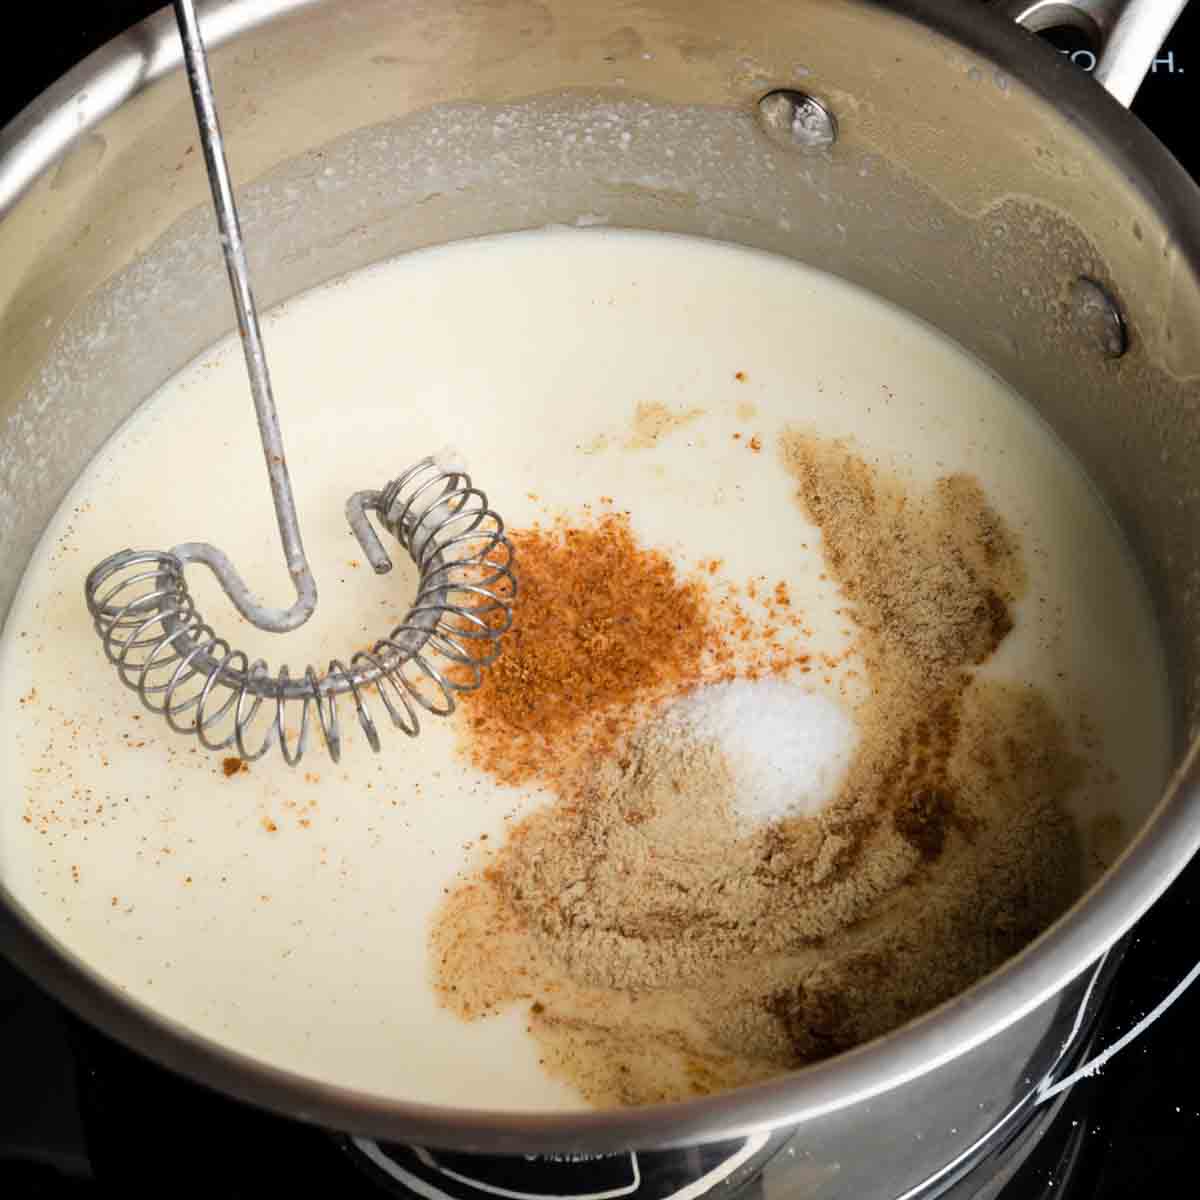 Whisking spices into a béchamel sauce